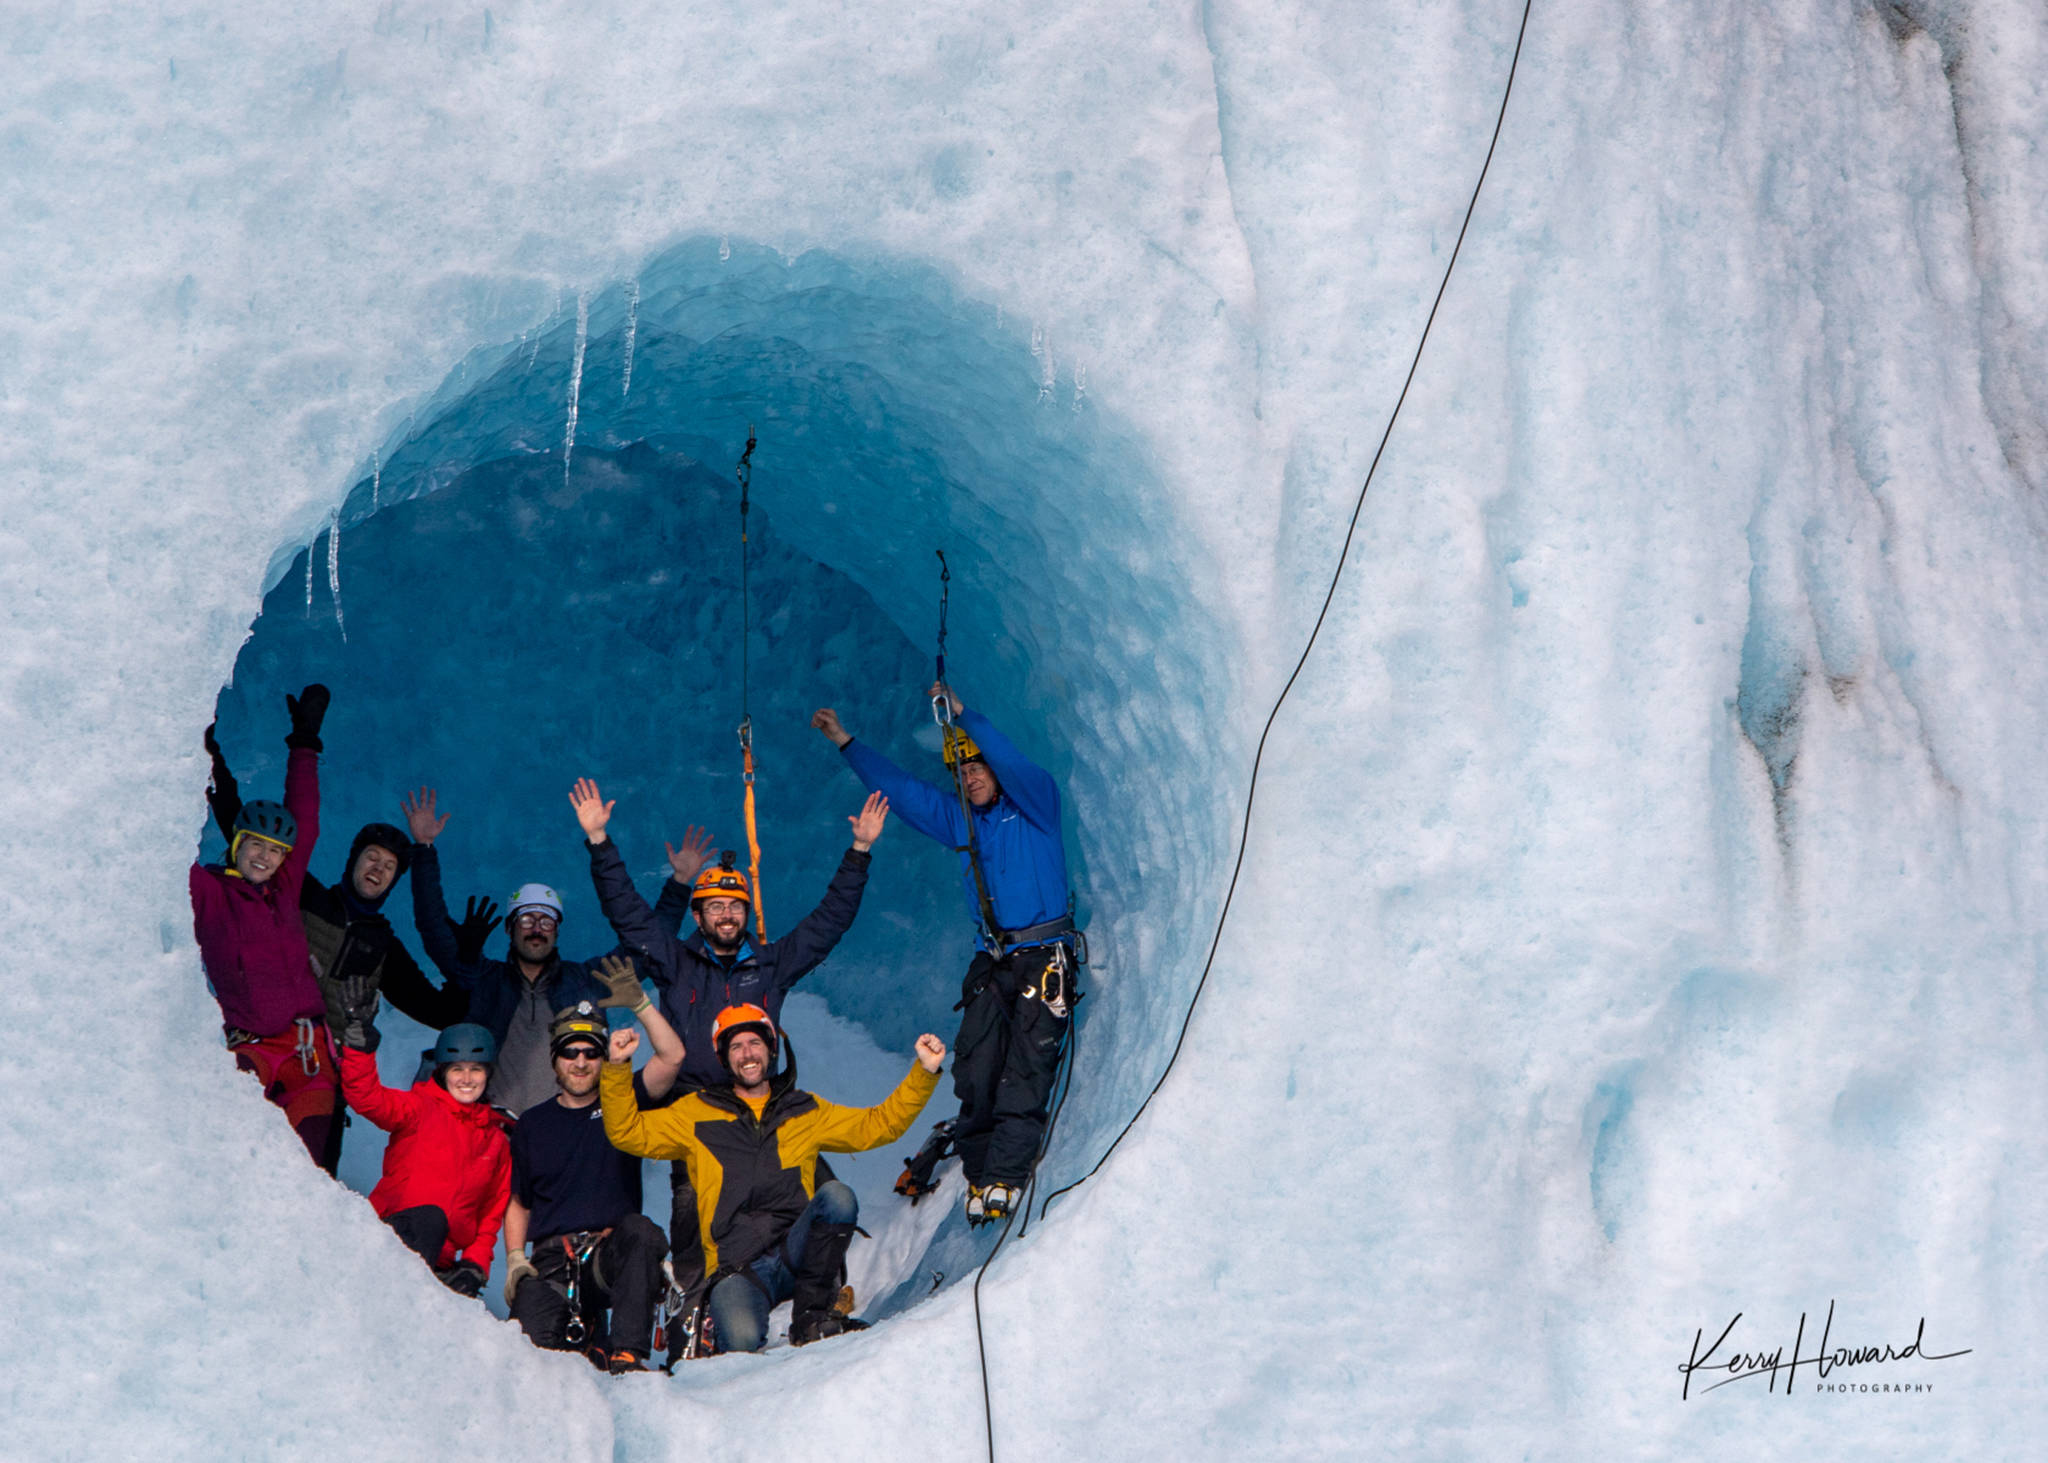 Local climbers descend into the blue moulin on the face of the Mendenhall Glacier on March 9, 2019. (Courtesy Photo | Kerry Howard)